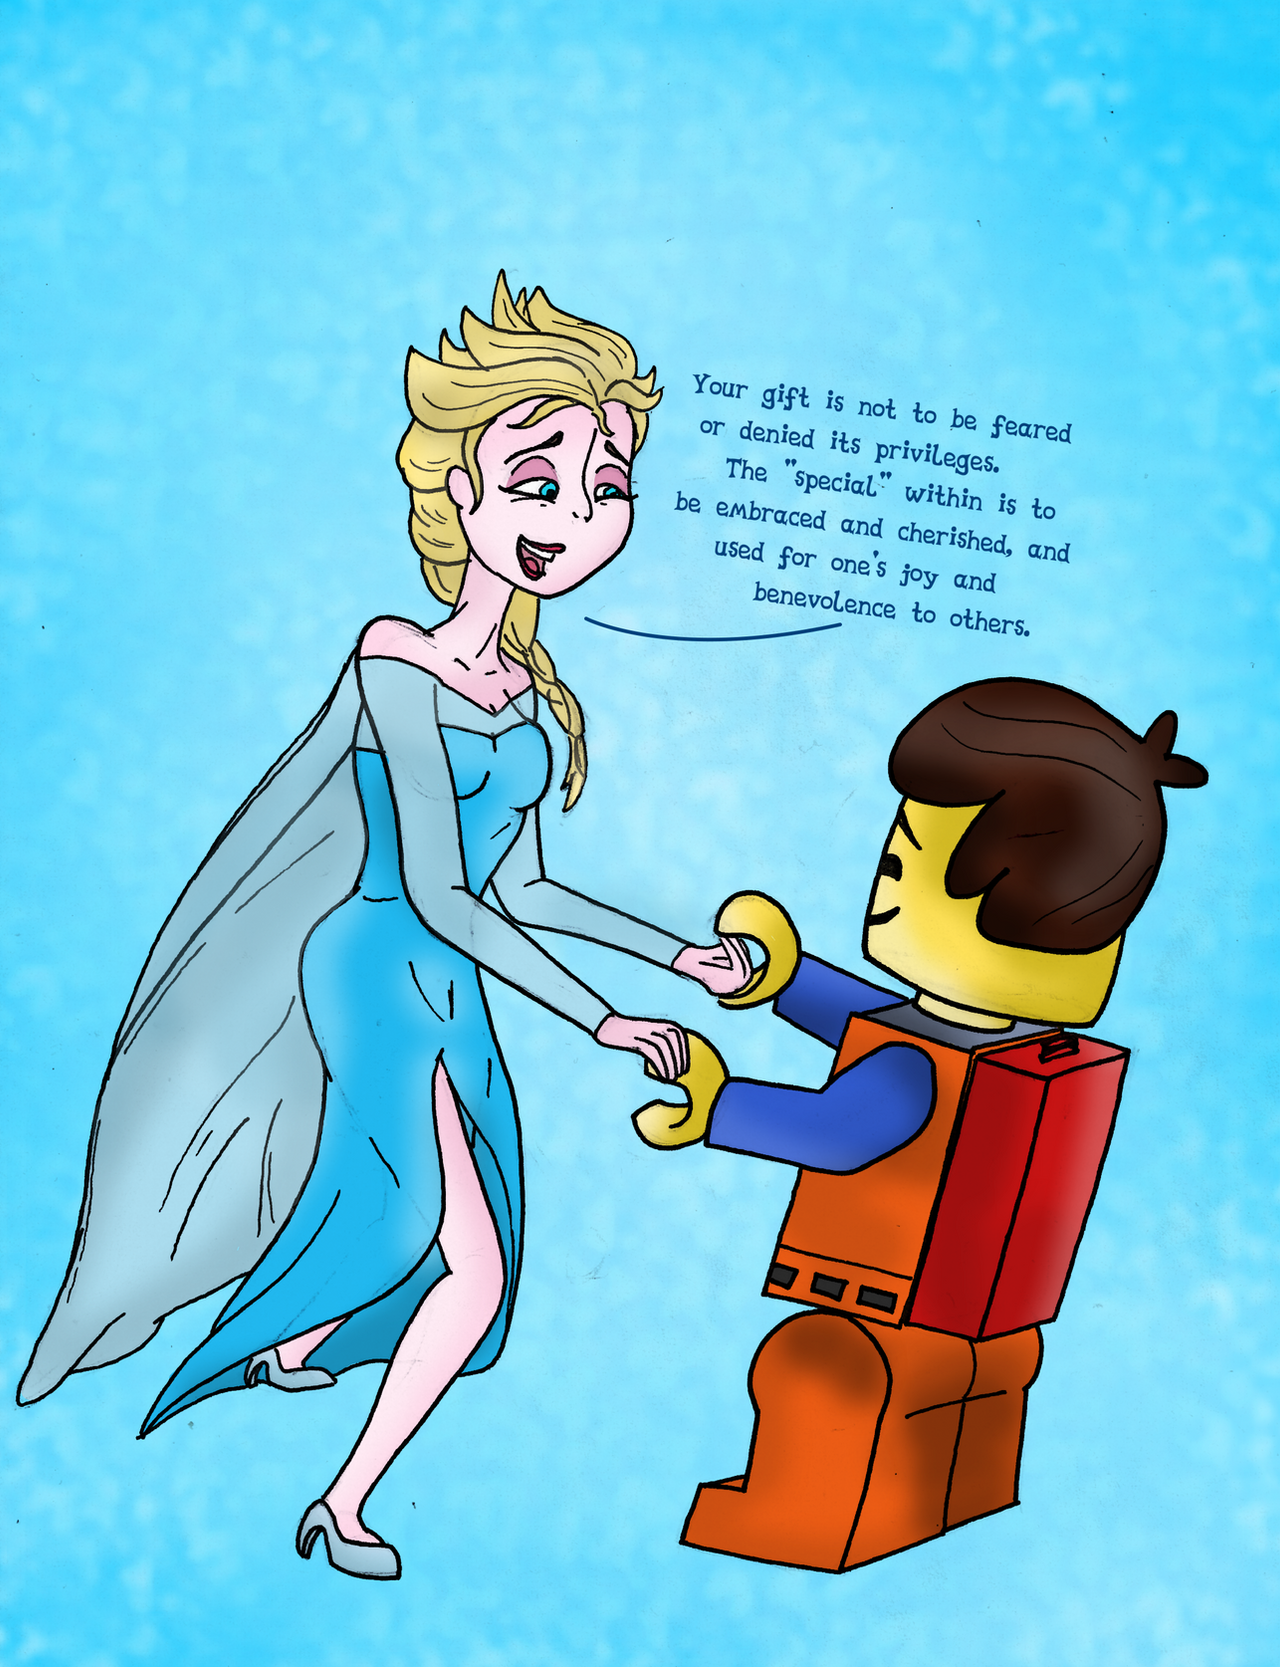 frozen_lego_movie_crossover__special_gift_by_cartuneslover16-d74wyby.png